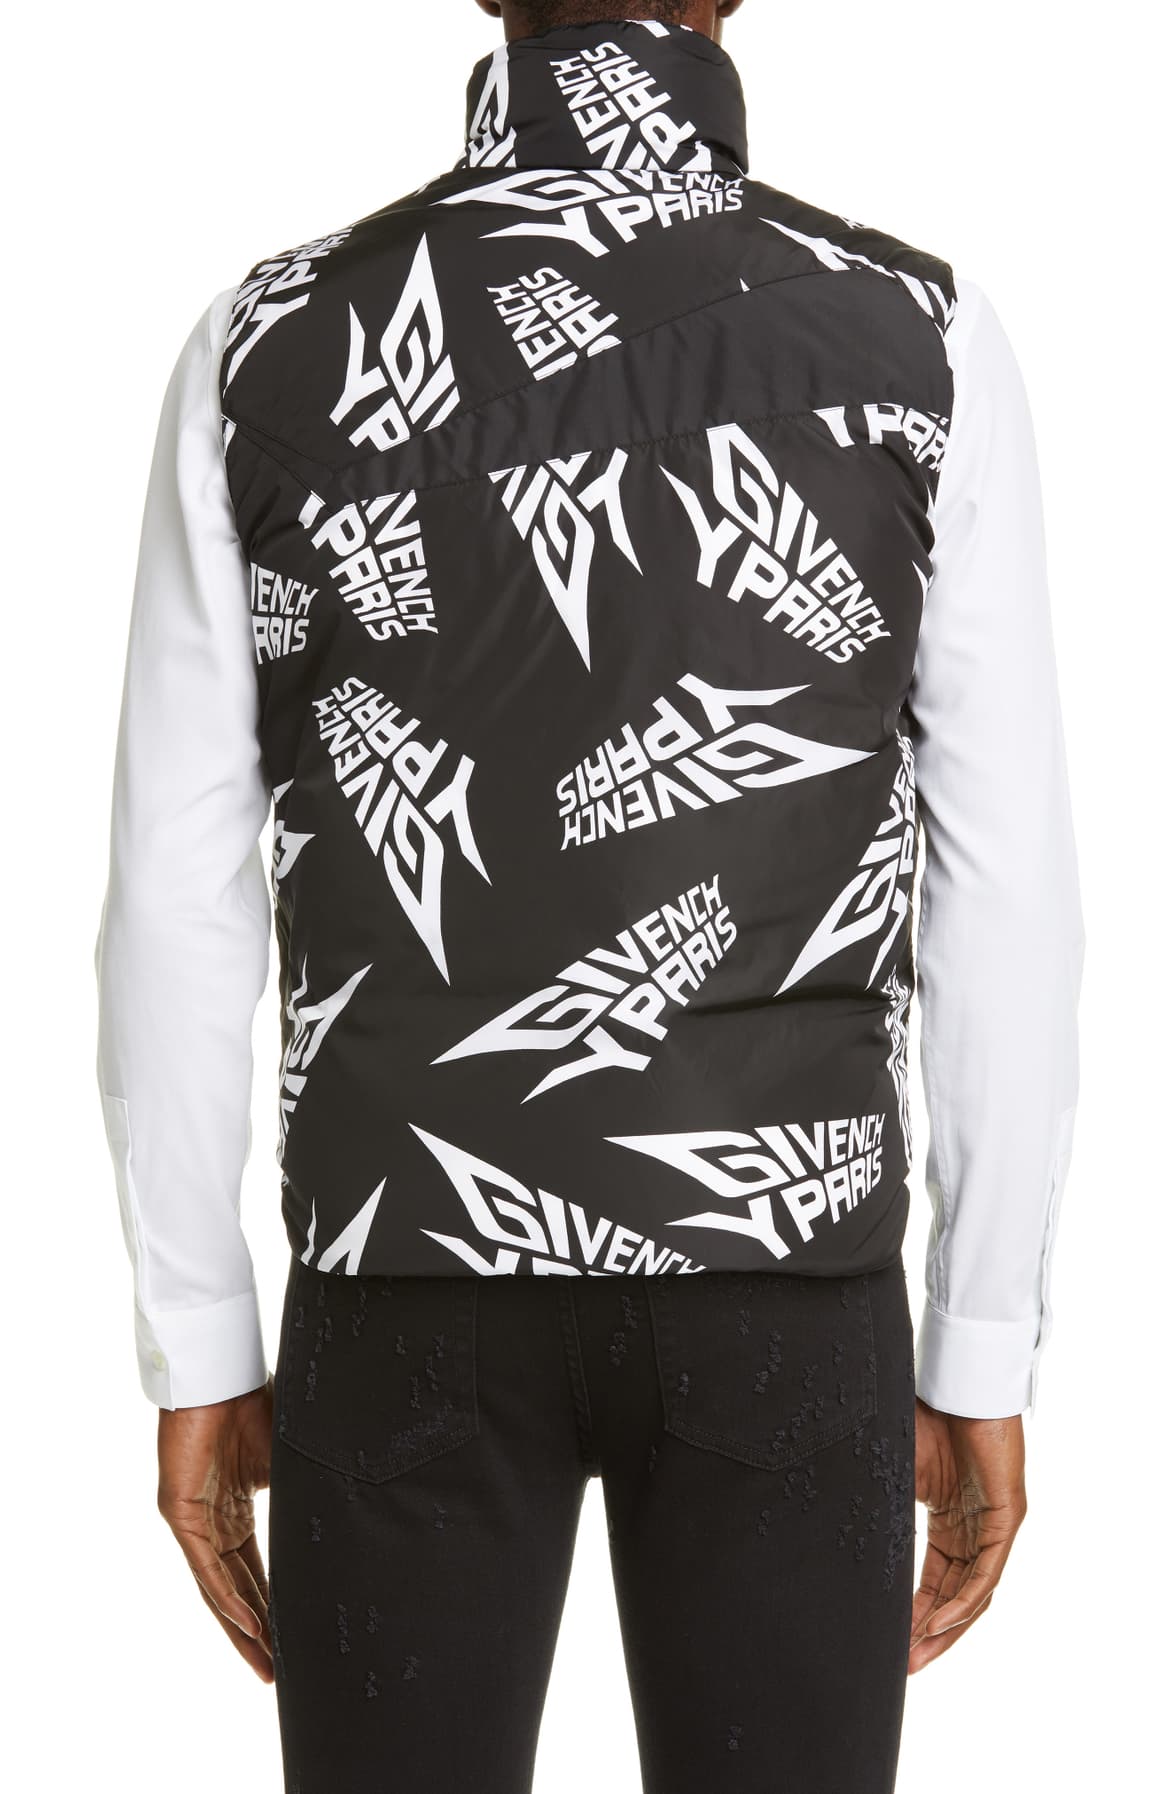 Givenchy reversible logo-print puffer jacket worn by Cane Tejada